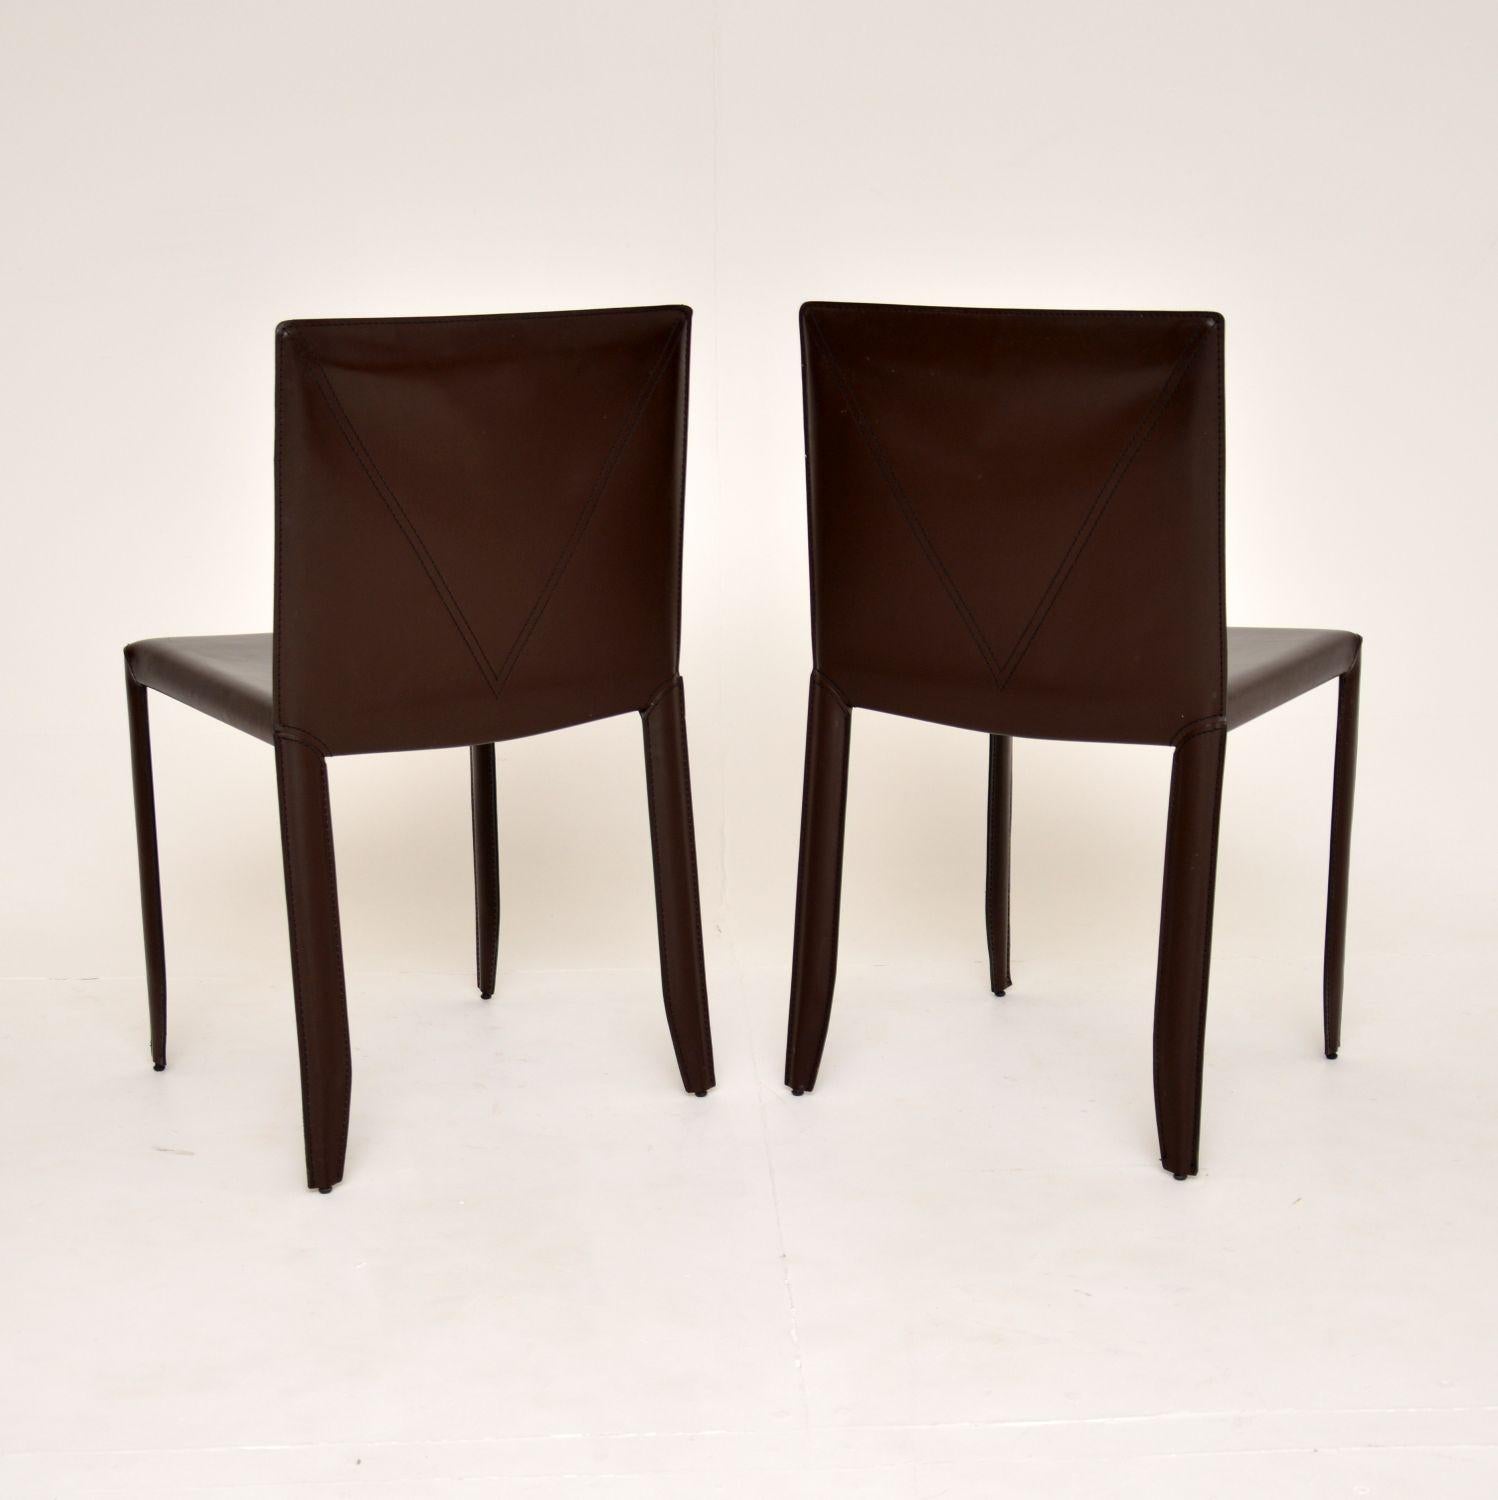 Pair of Modernist Italian Leather Side Chairs by Cattelan Italia 1